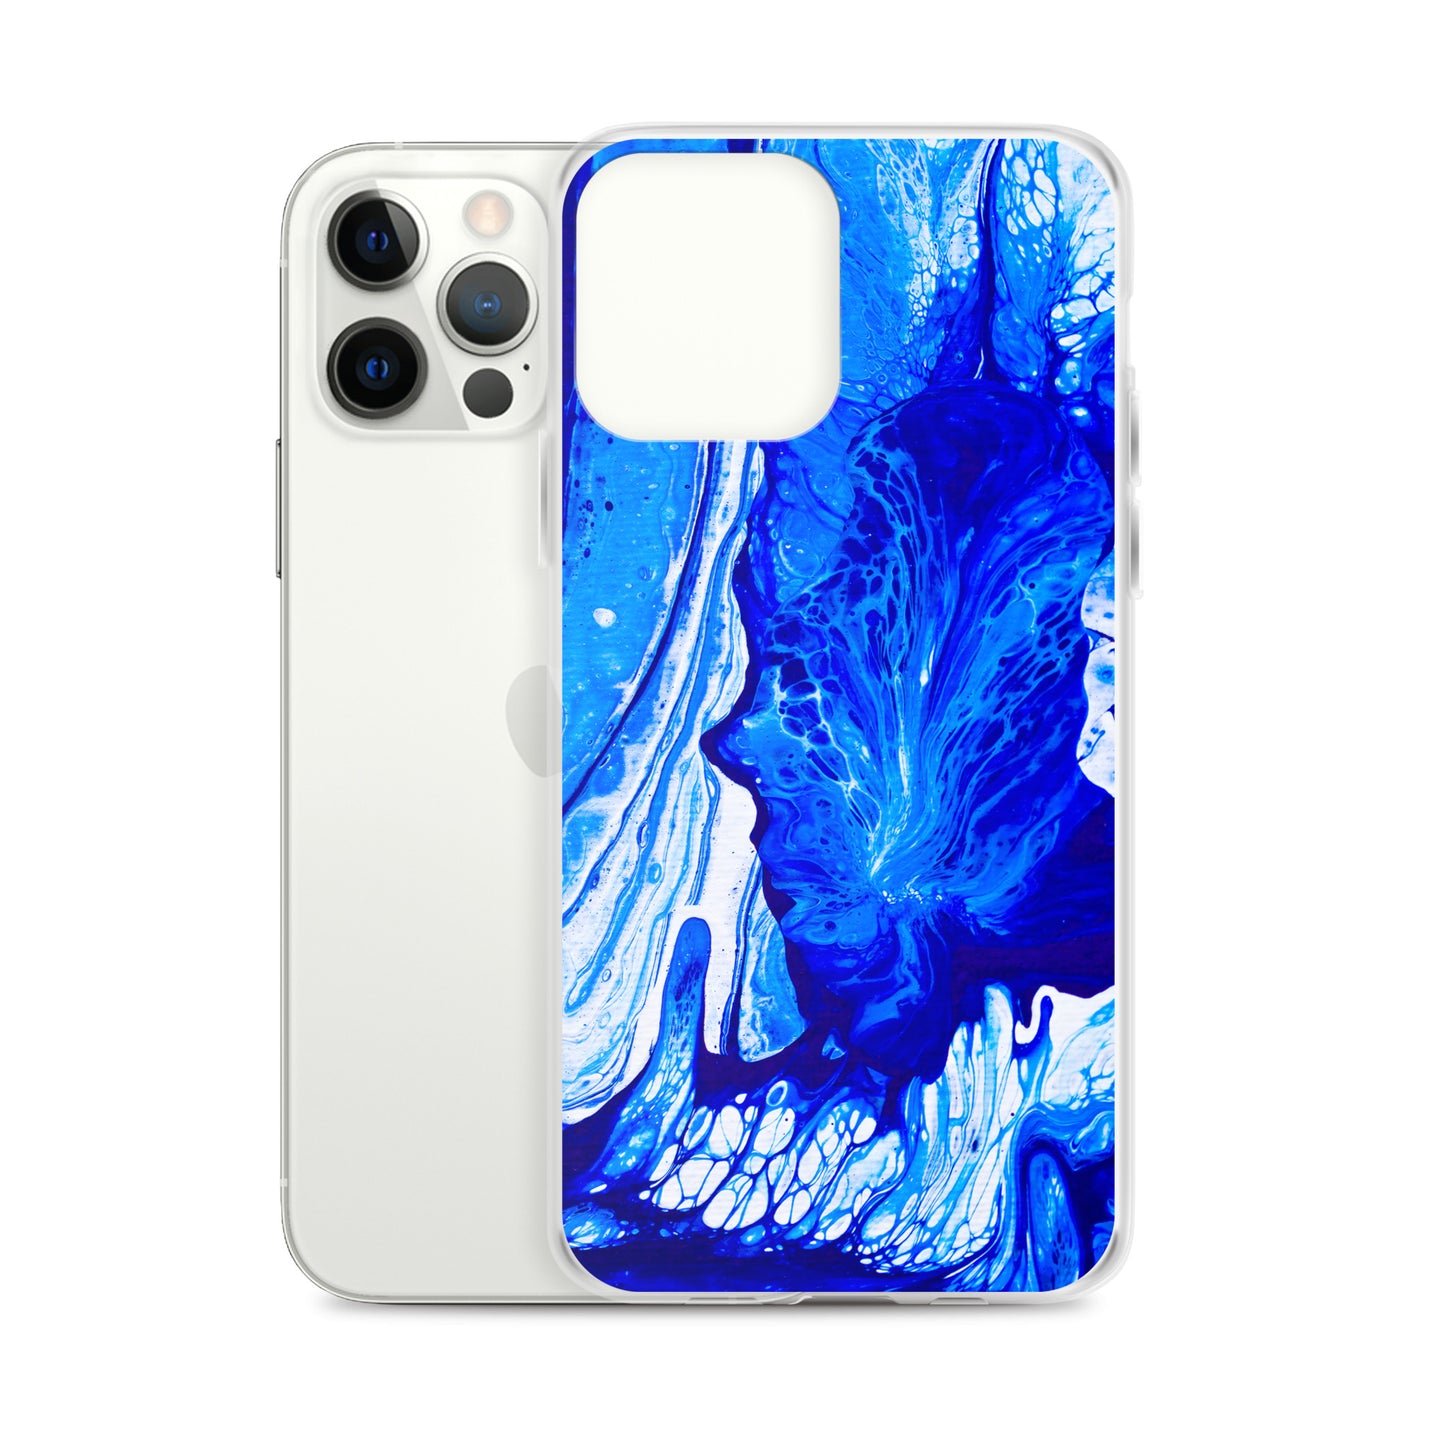 NightOwl Studio Custom Phone Case Compatible with iPhone, Ultra Slim Cover with Heavy Duty Scratch Resistant Shockproof Protection, Ms. Blue